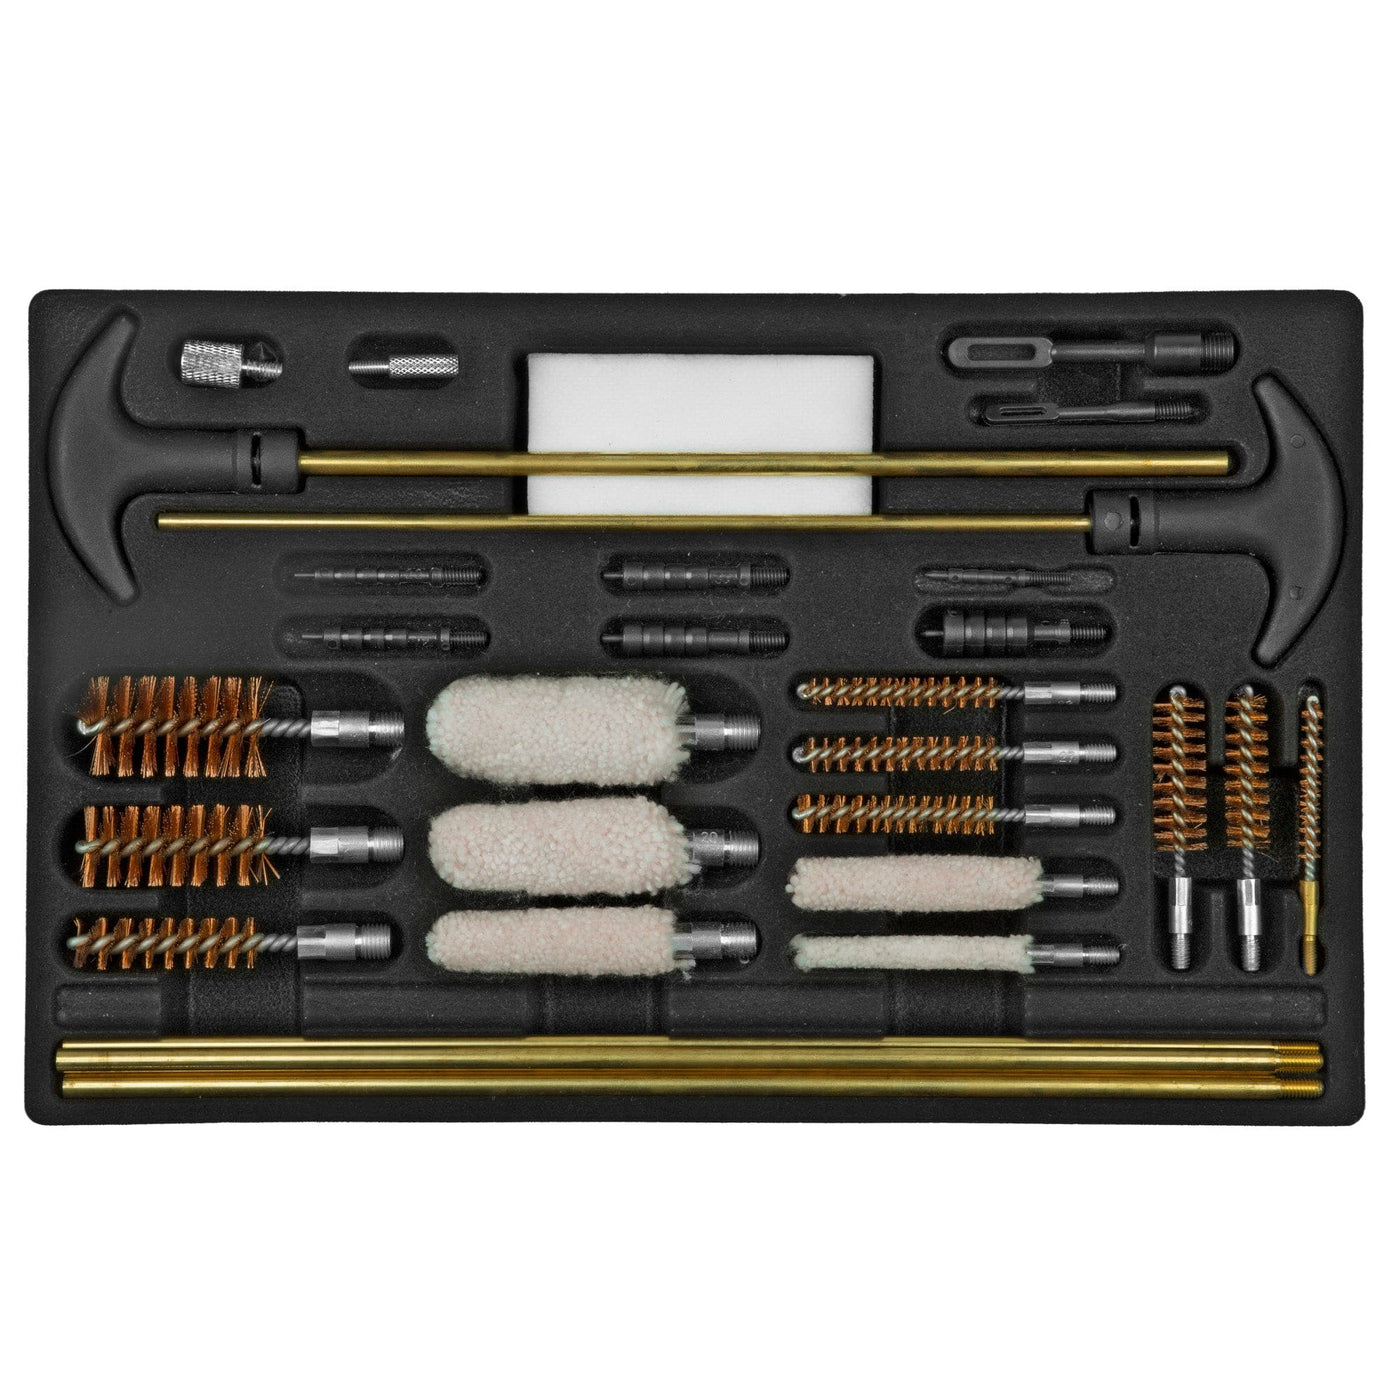 Outers Outers Universal Cleaning Kit Wood Gun 32 Pc. Cleaning Equipment